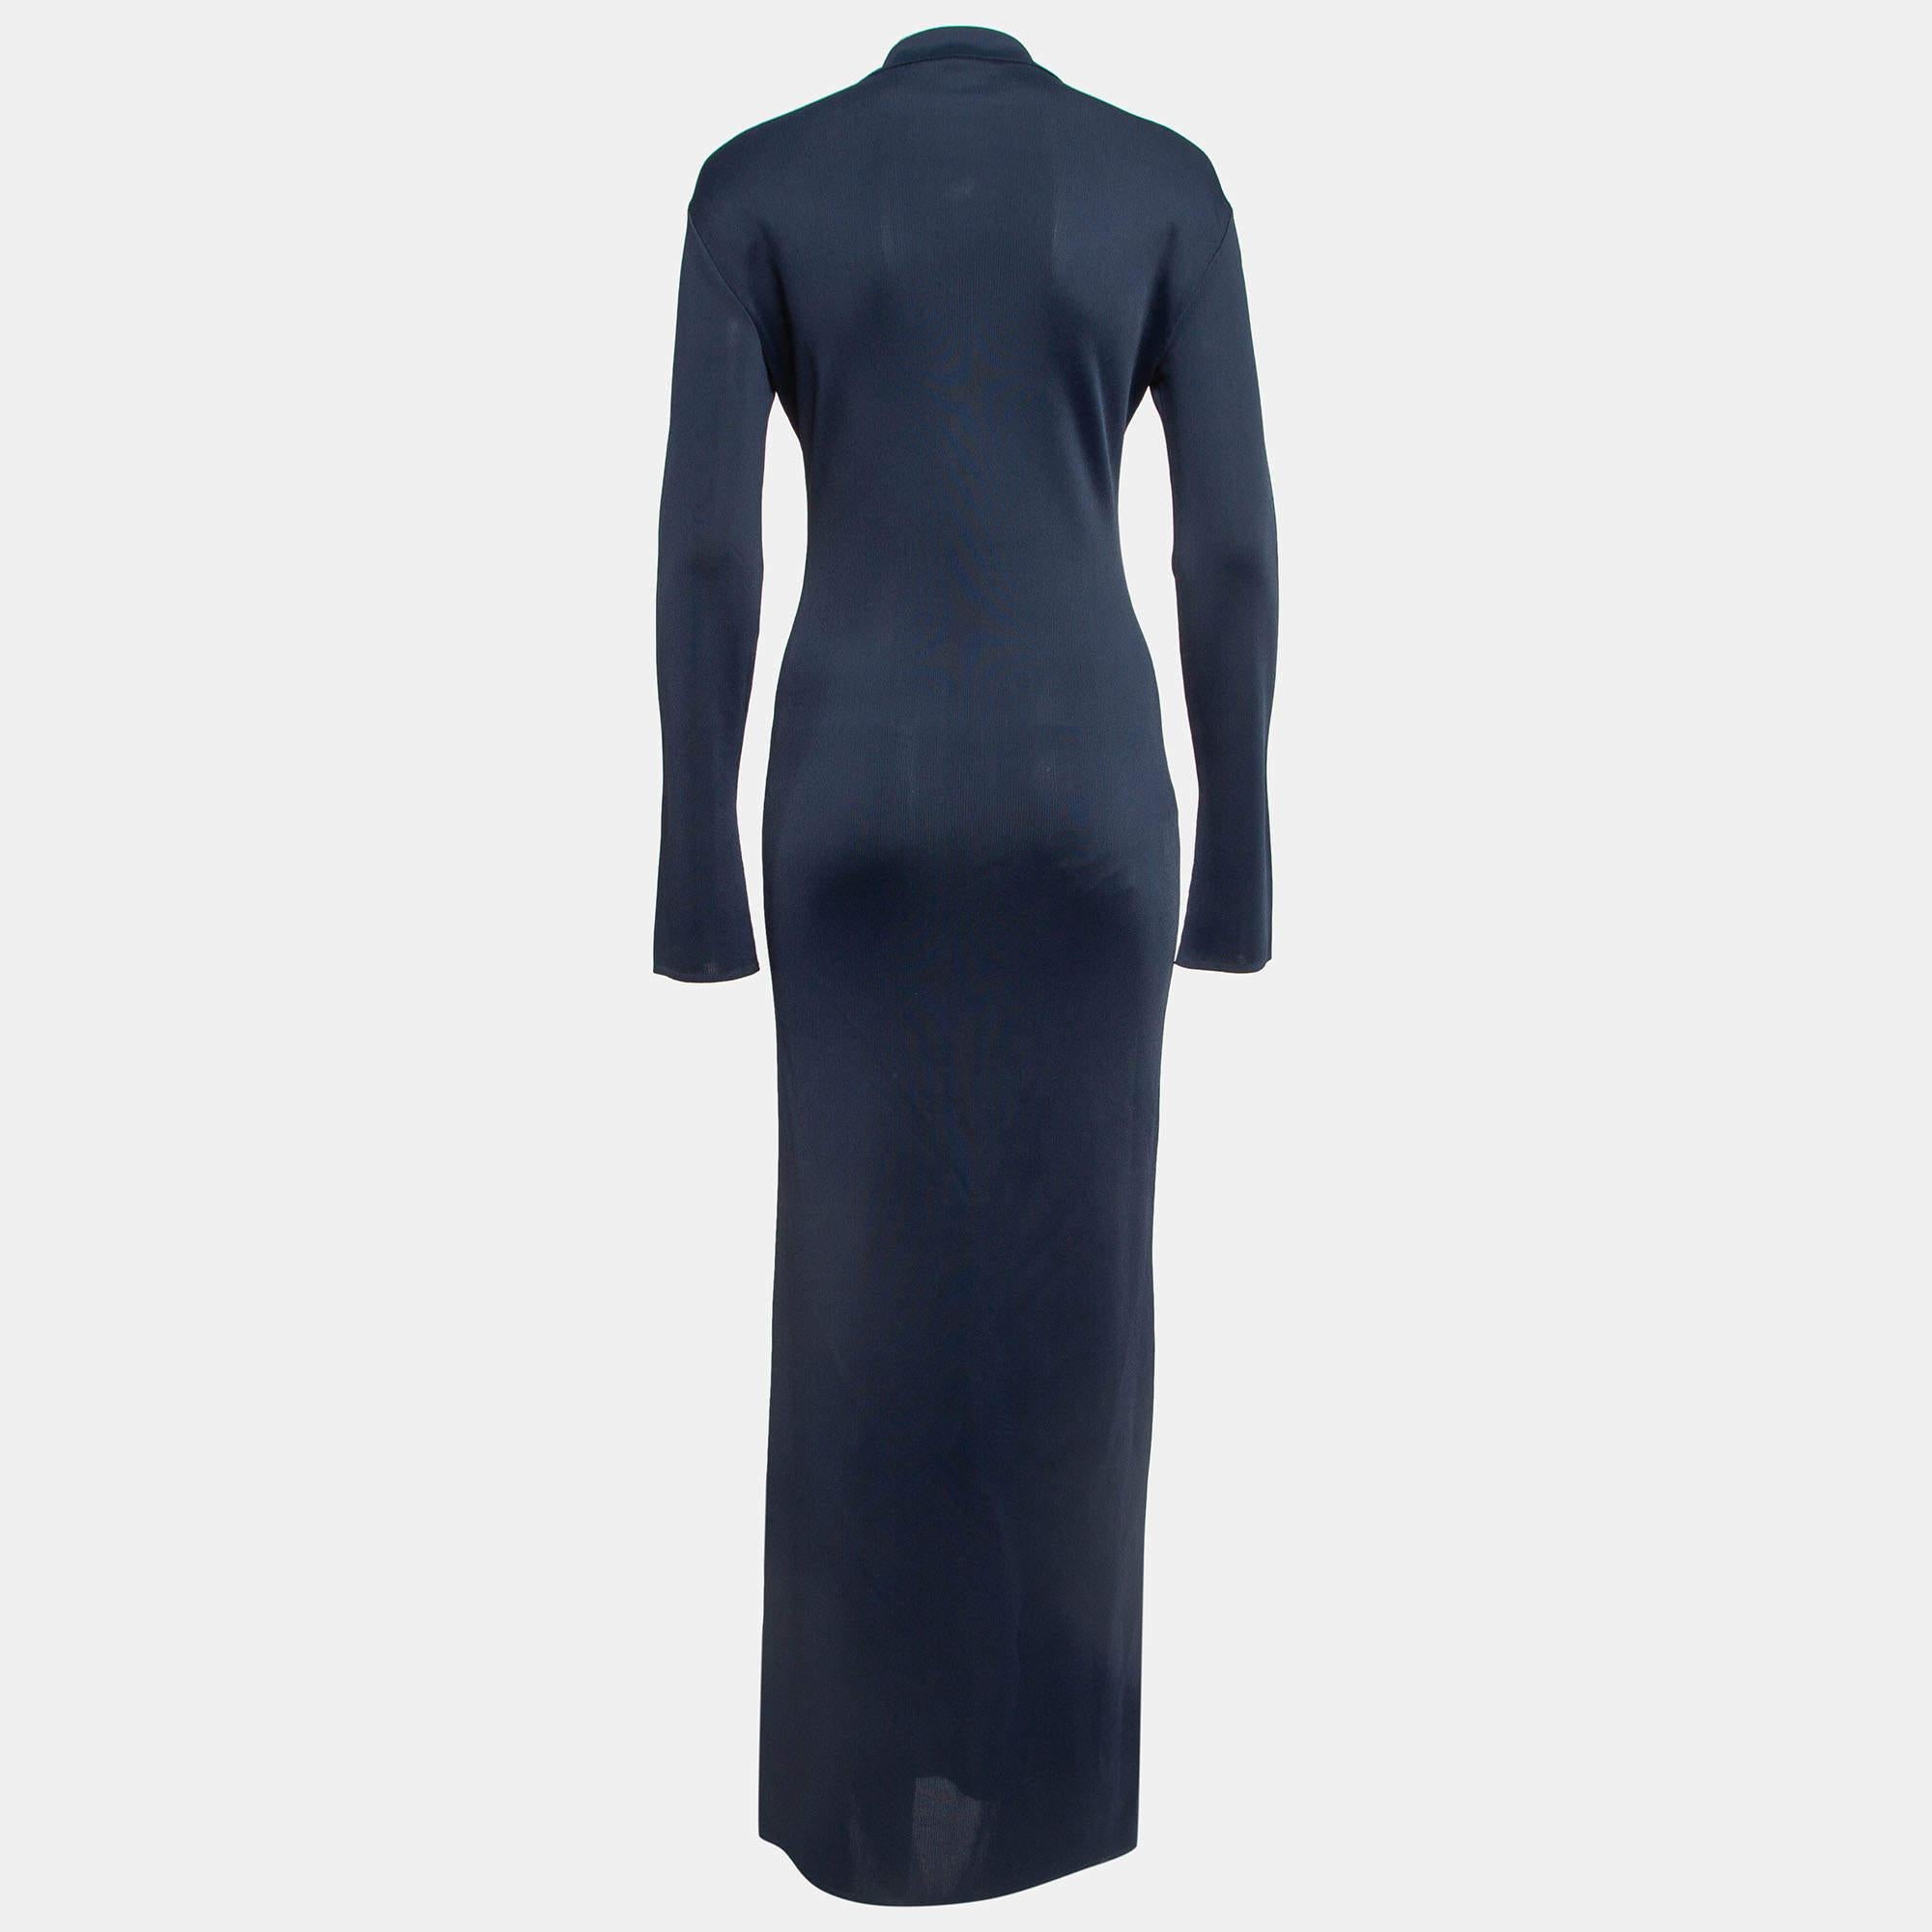 Exhibit a stylish look by wearing this beautiful designer dress. Tailored using fine fabric, this dress has a chic silhouette for a framing fit. Style the creation with chic accessories and pumps.

